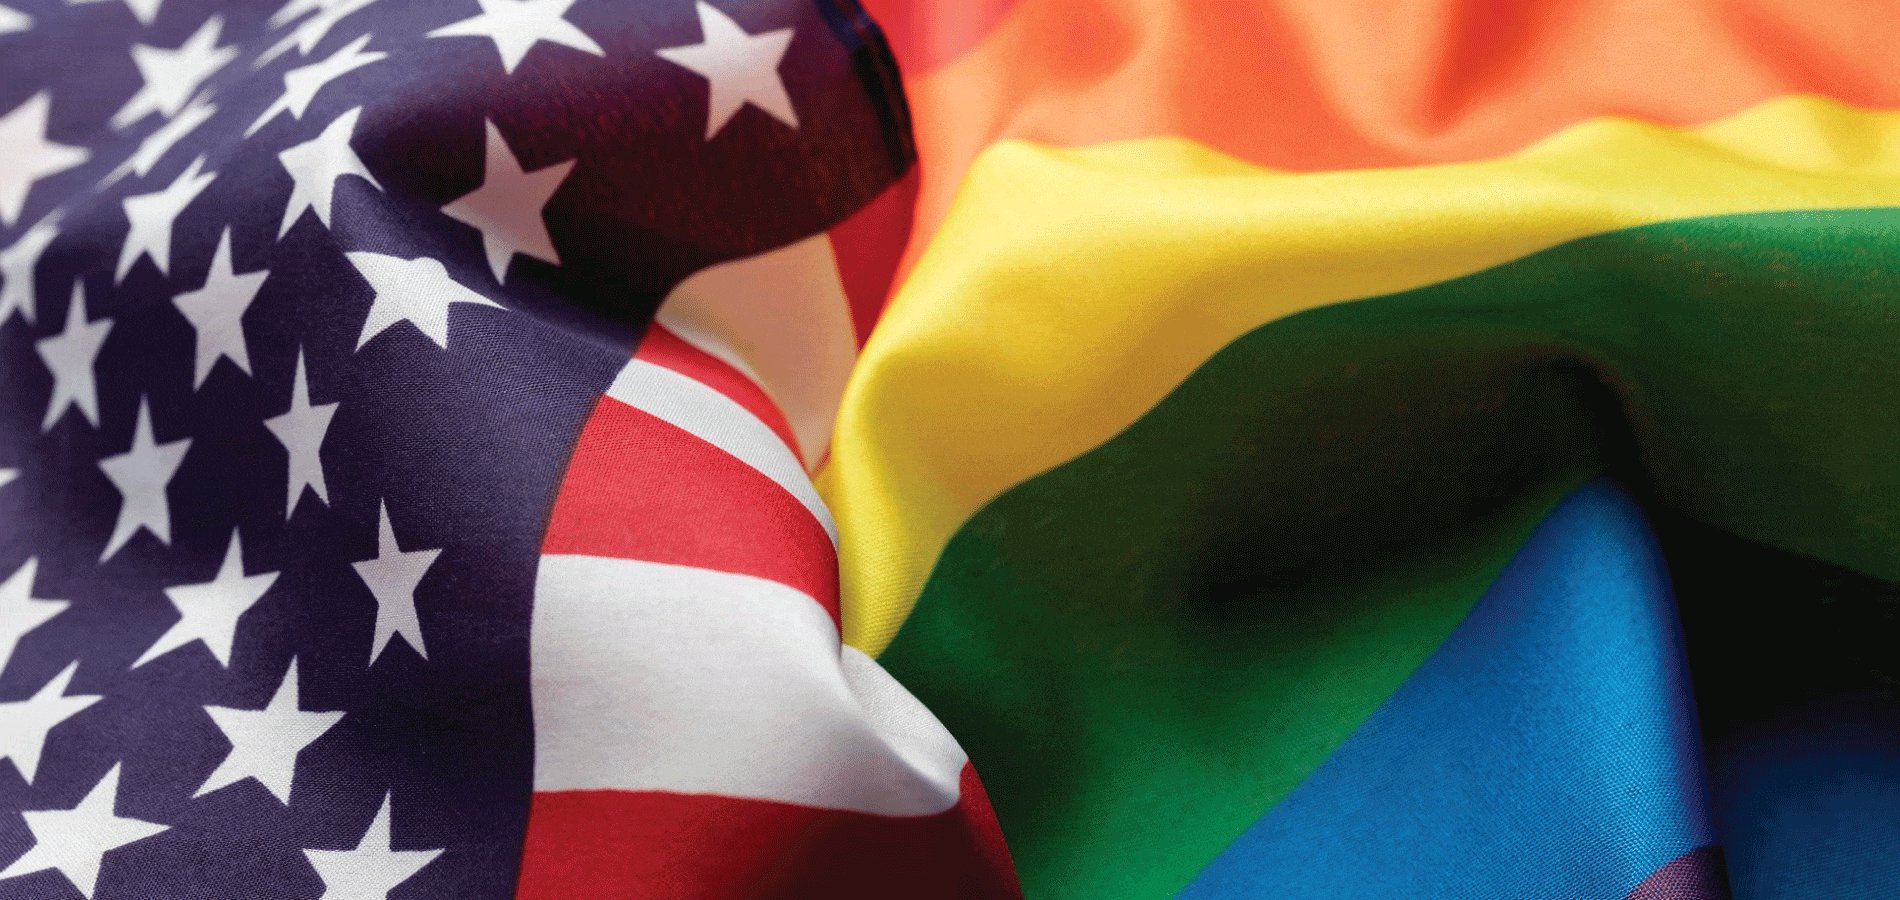 image of U.S. flag and rainbow flag next to each other